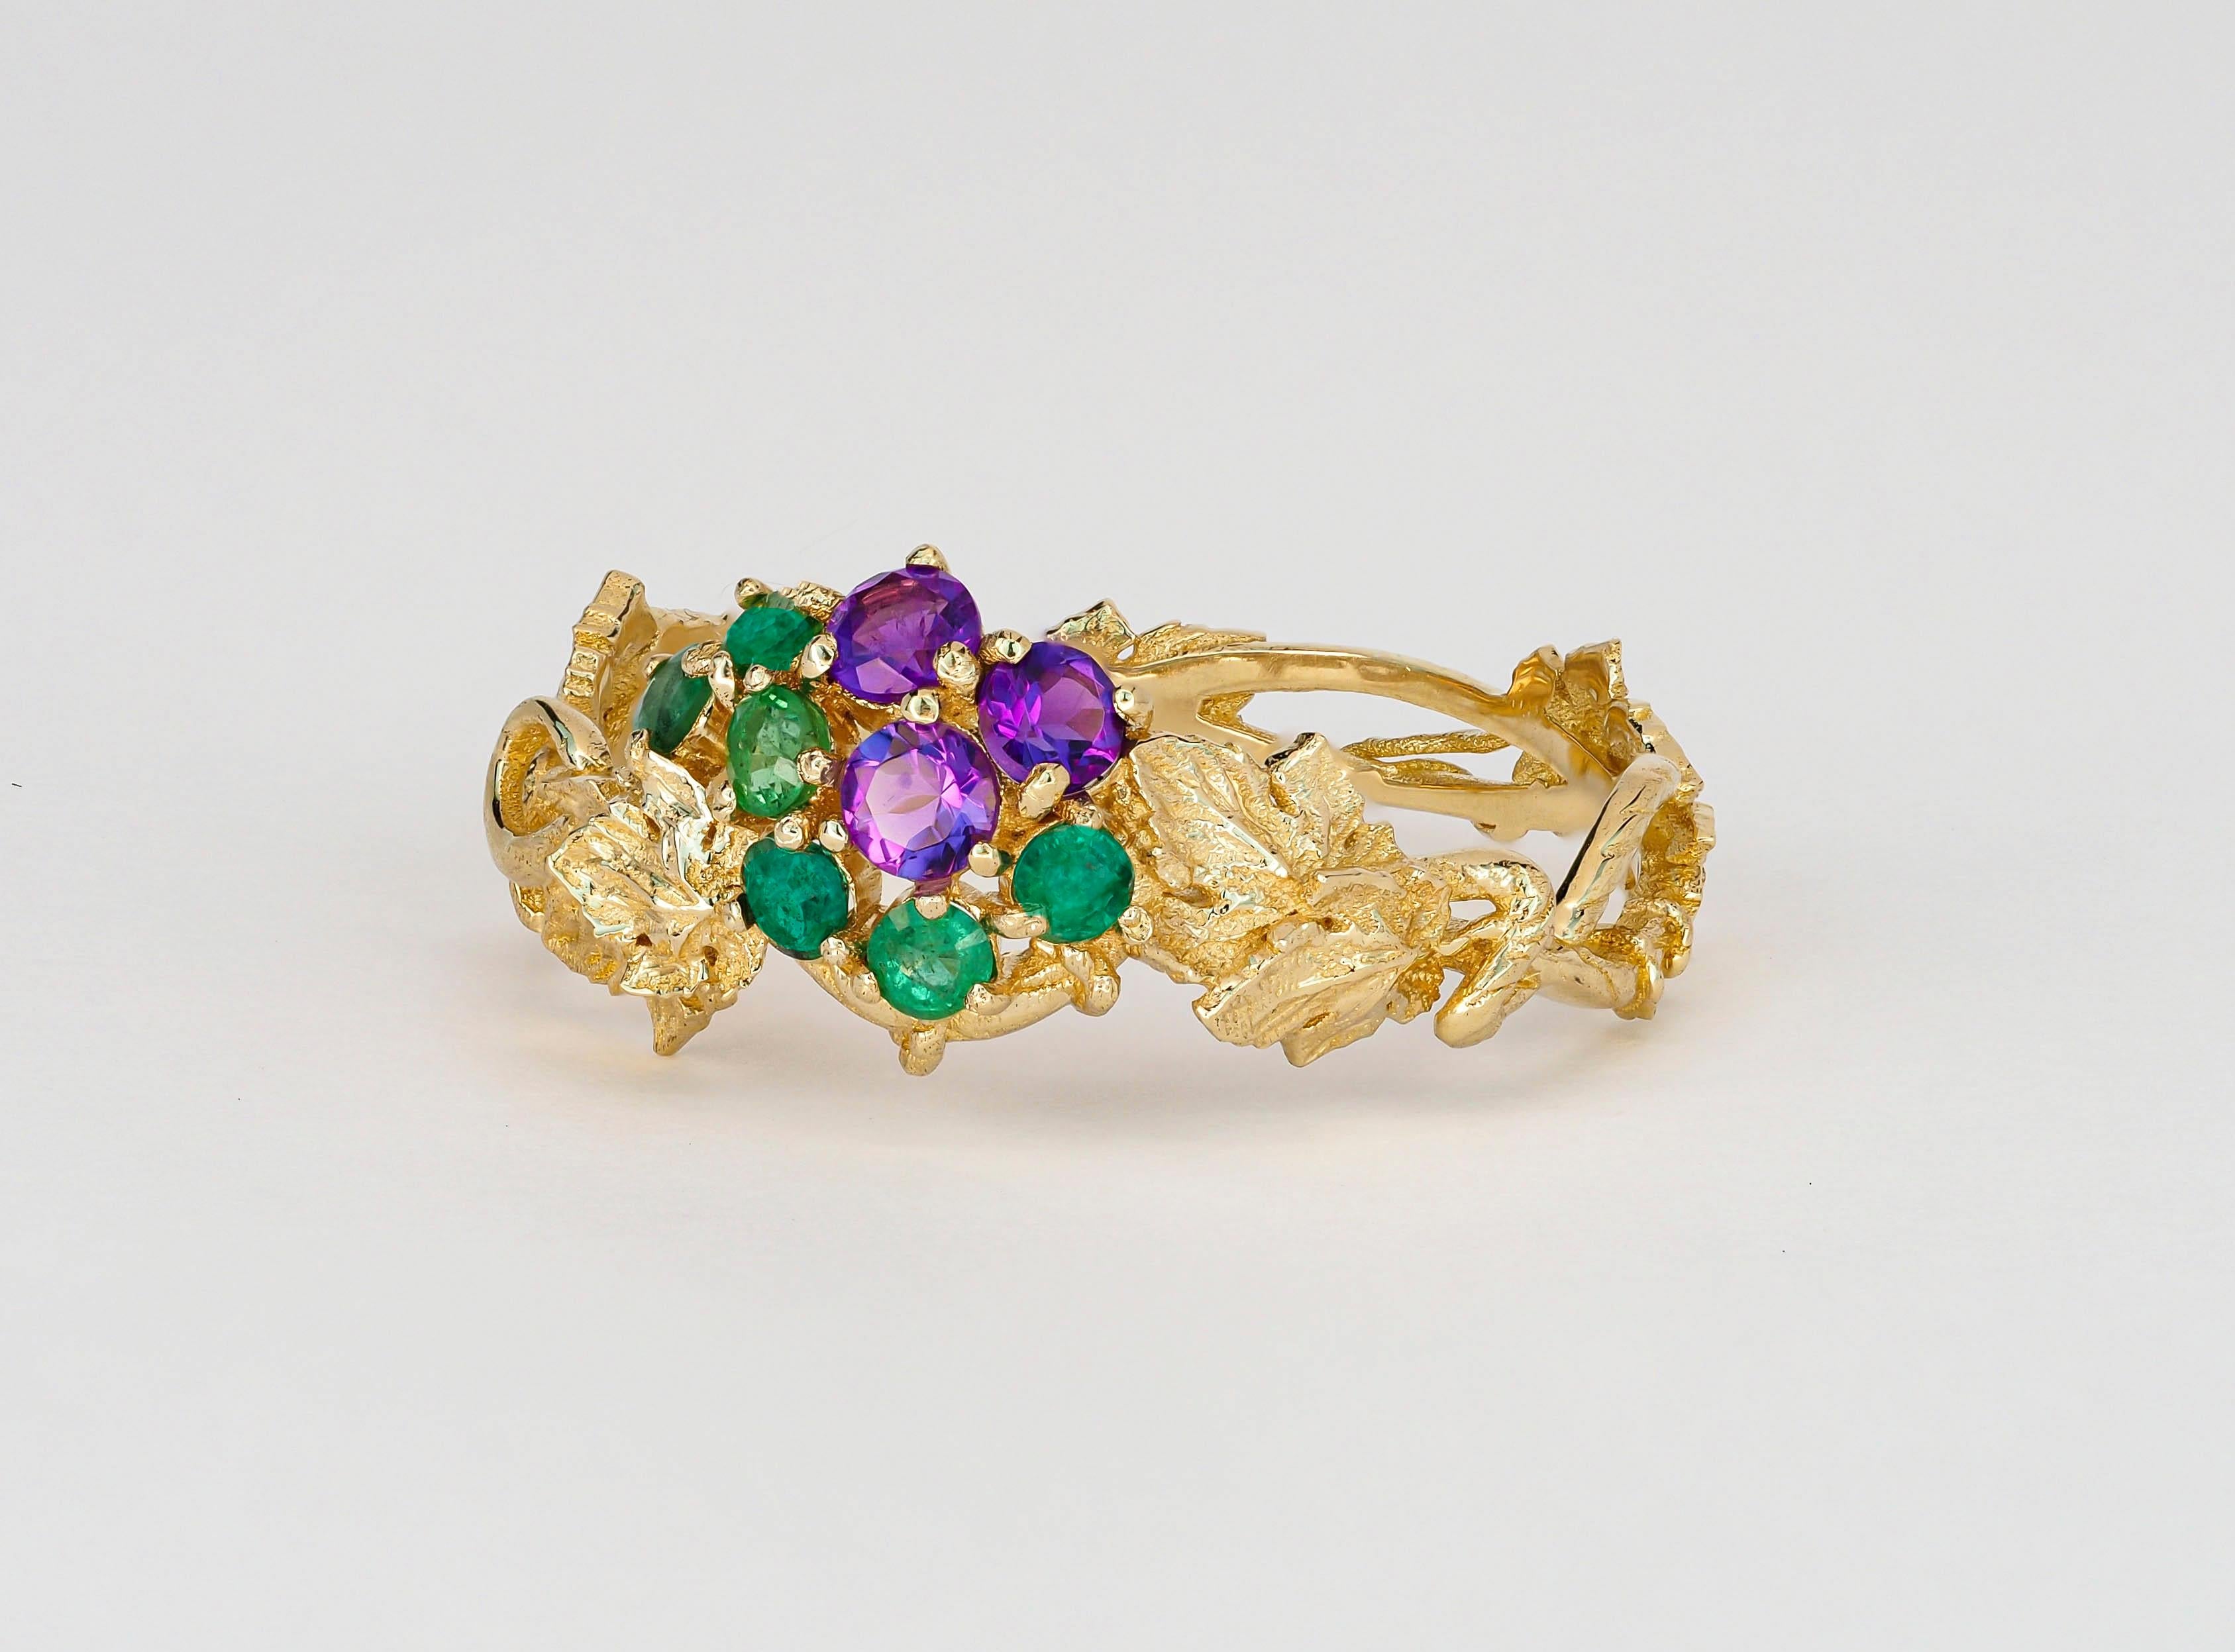 Women's Grape ring with emeralds, amethysts in 14k gold.  For Sale